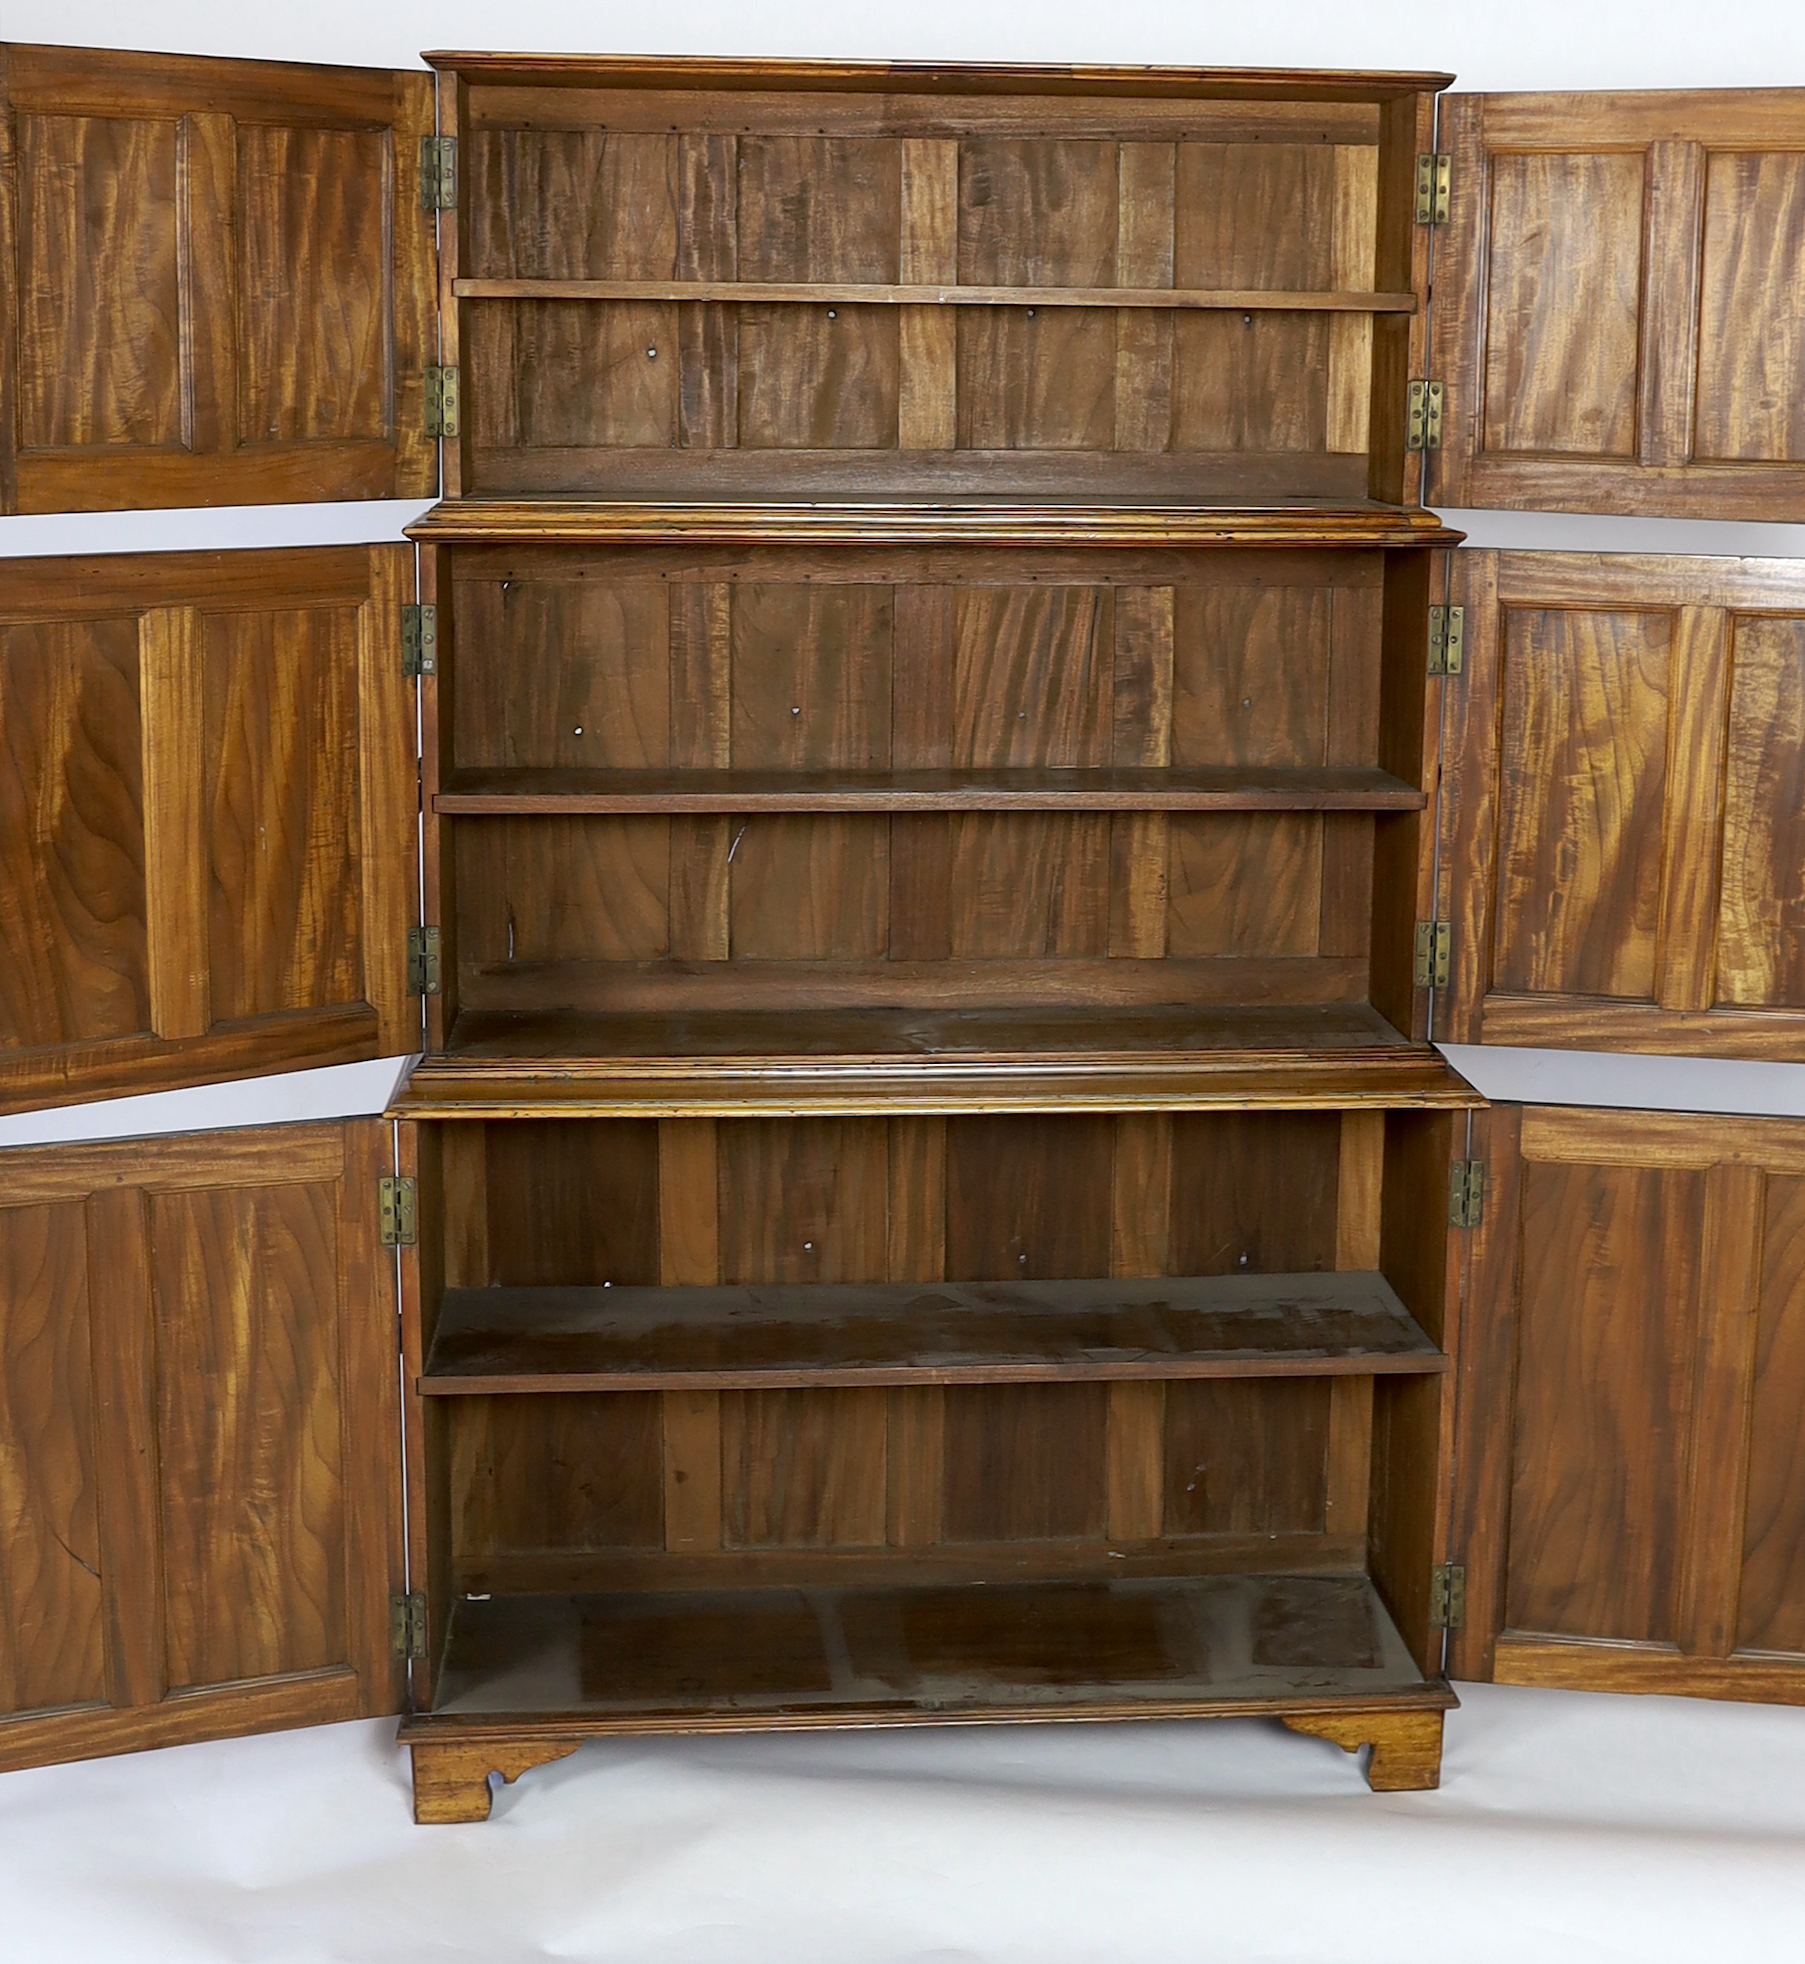 An unusual mid 19th century satinwood campaign bookcase, width 110cm, depth 34cm, height 177cm